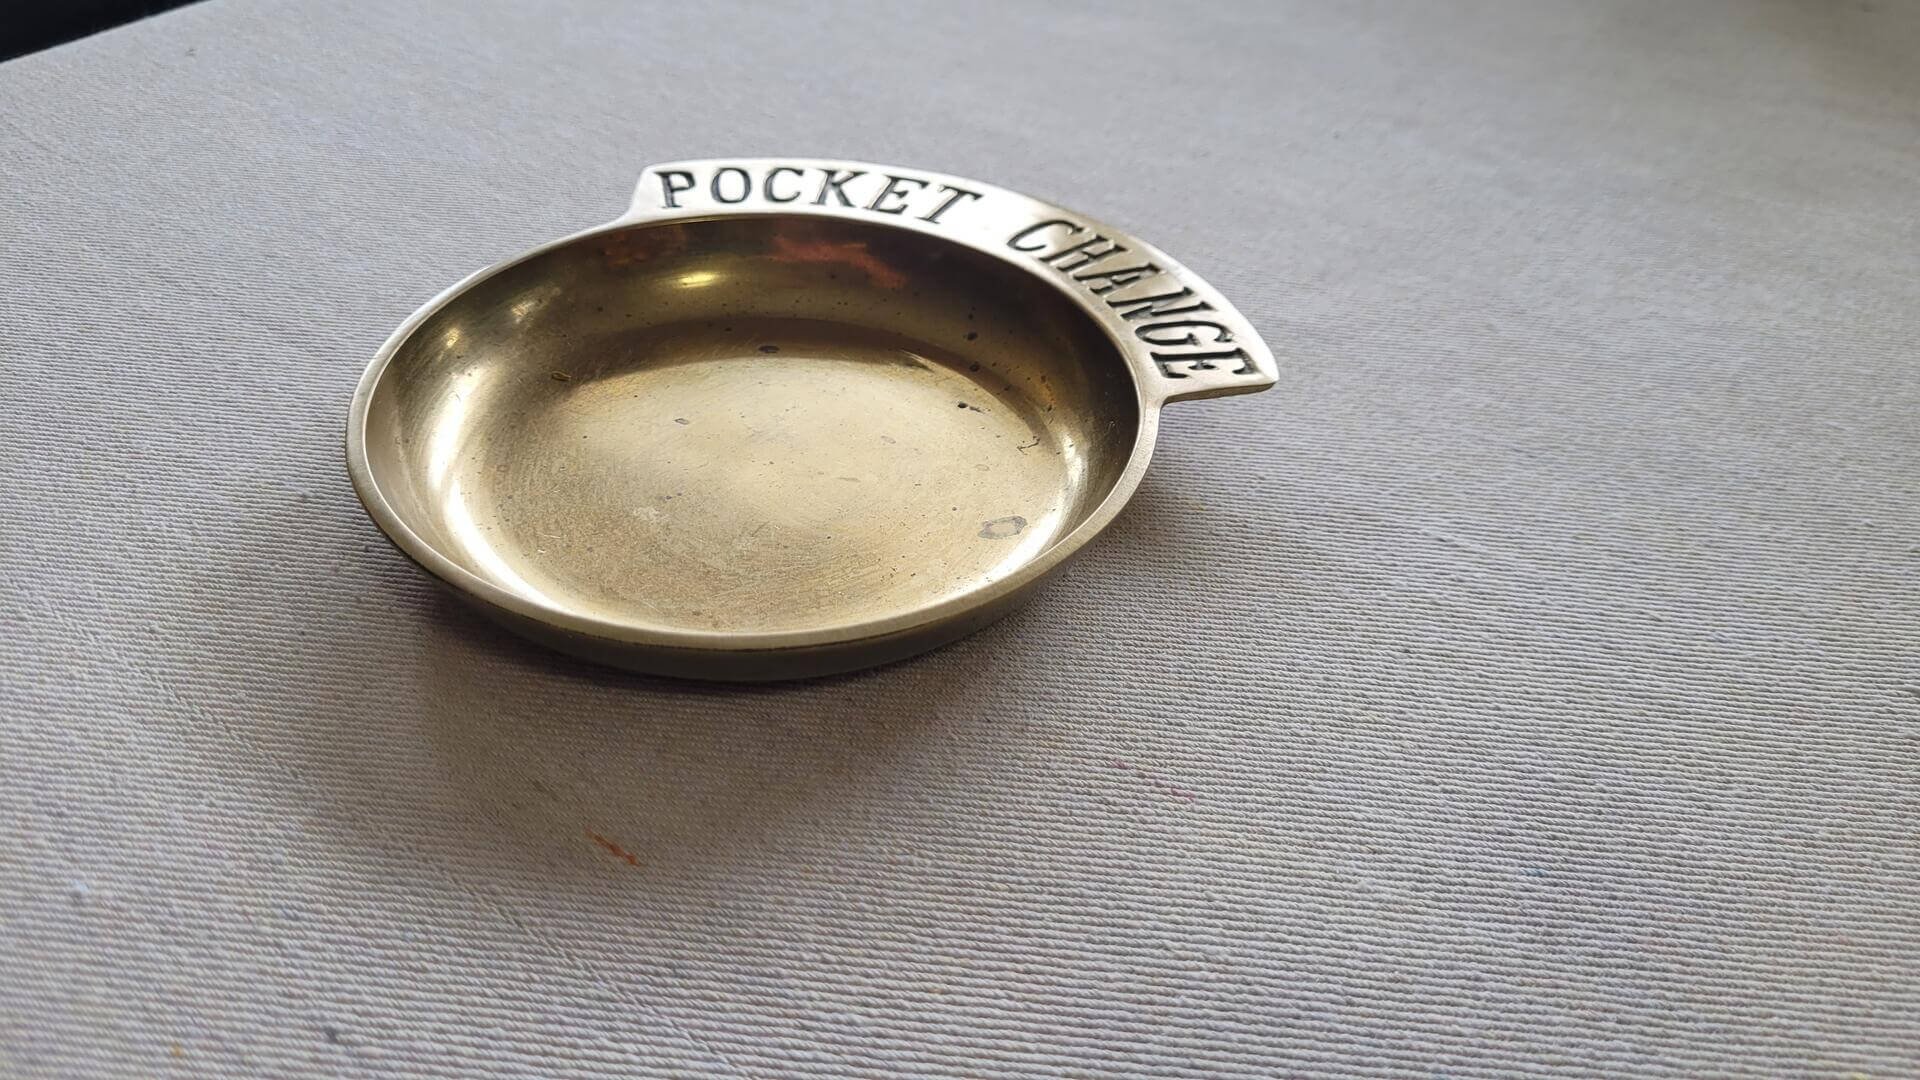 Nice vintage soilid brass coin trinket dish with engraved pocket change. Antique MCM metalware and brassware coin tray holder and household collectible